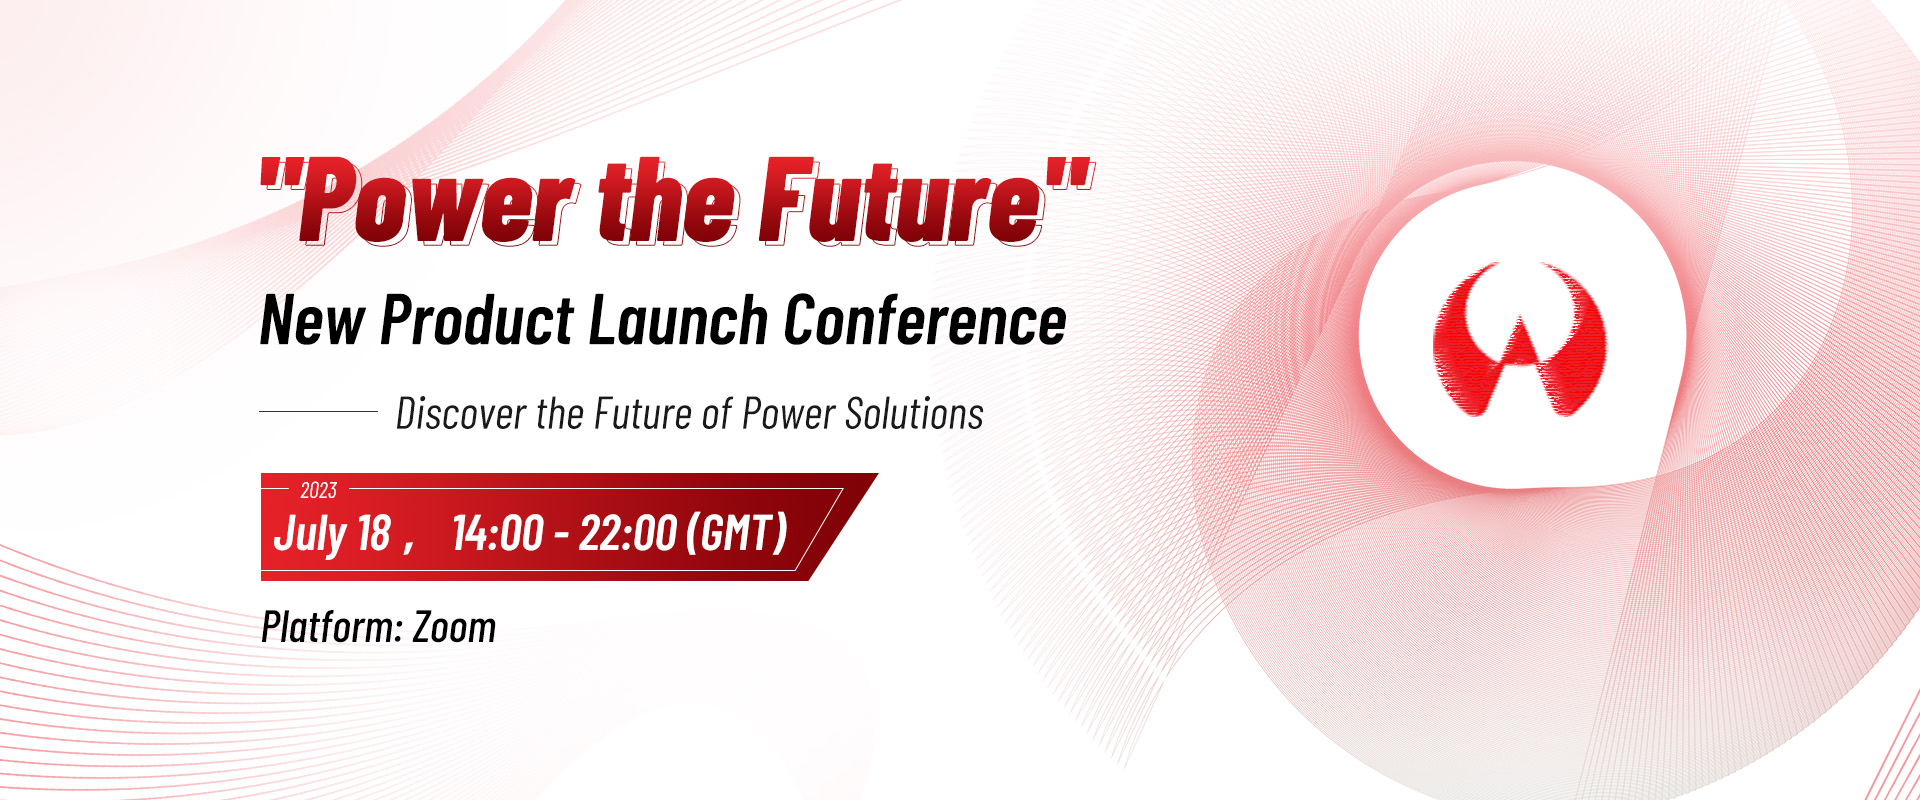 INVITATION| “Power the future” New Product Launch Conference